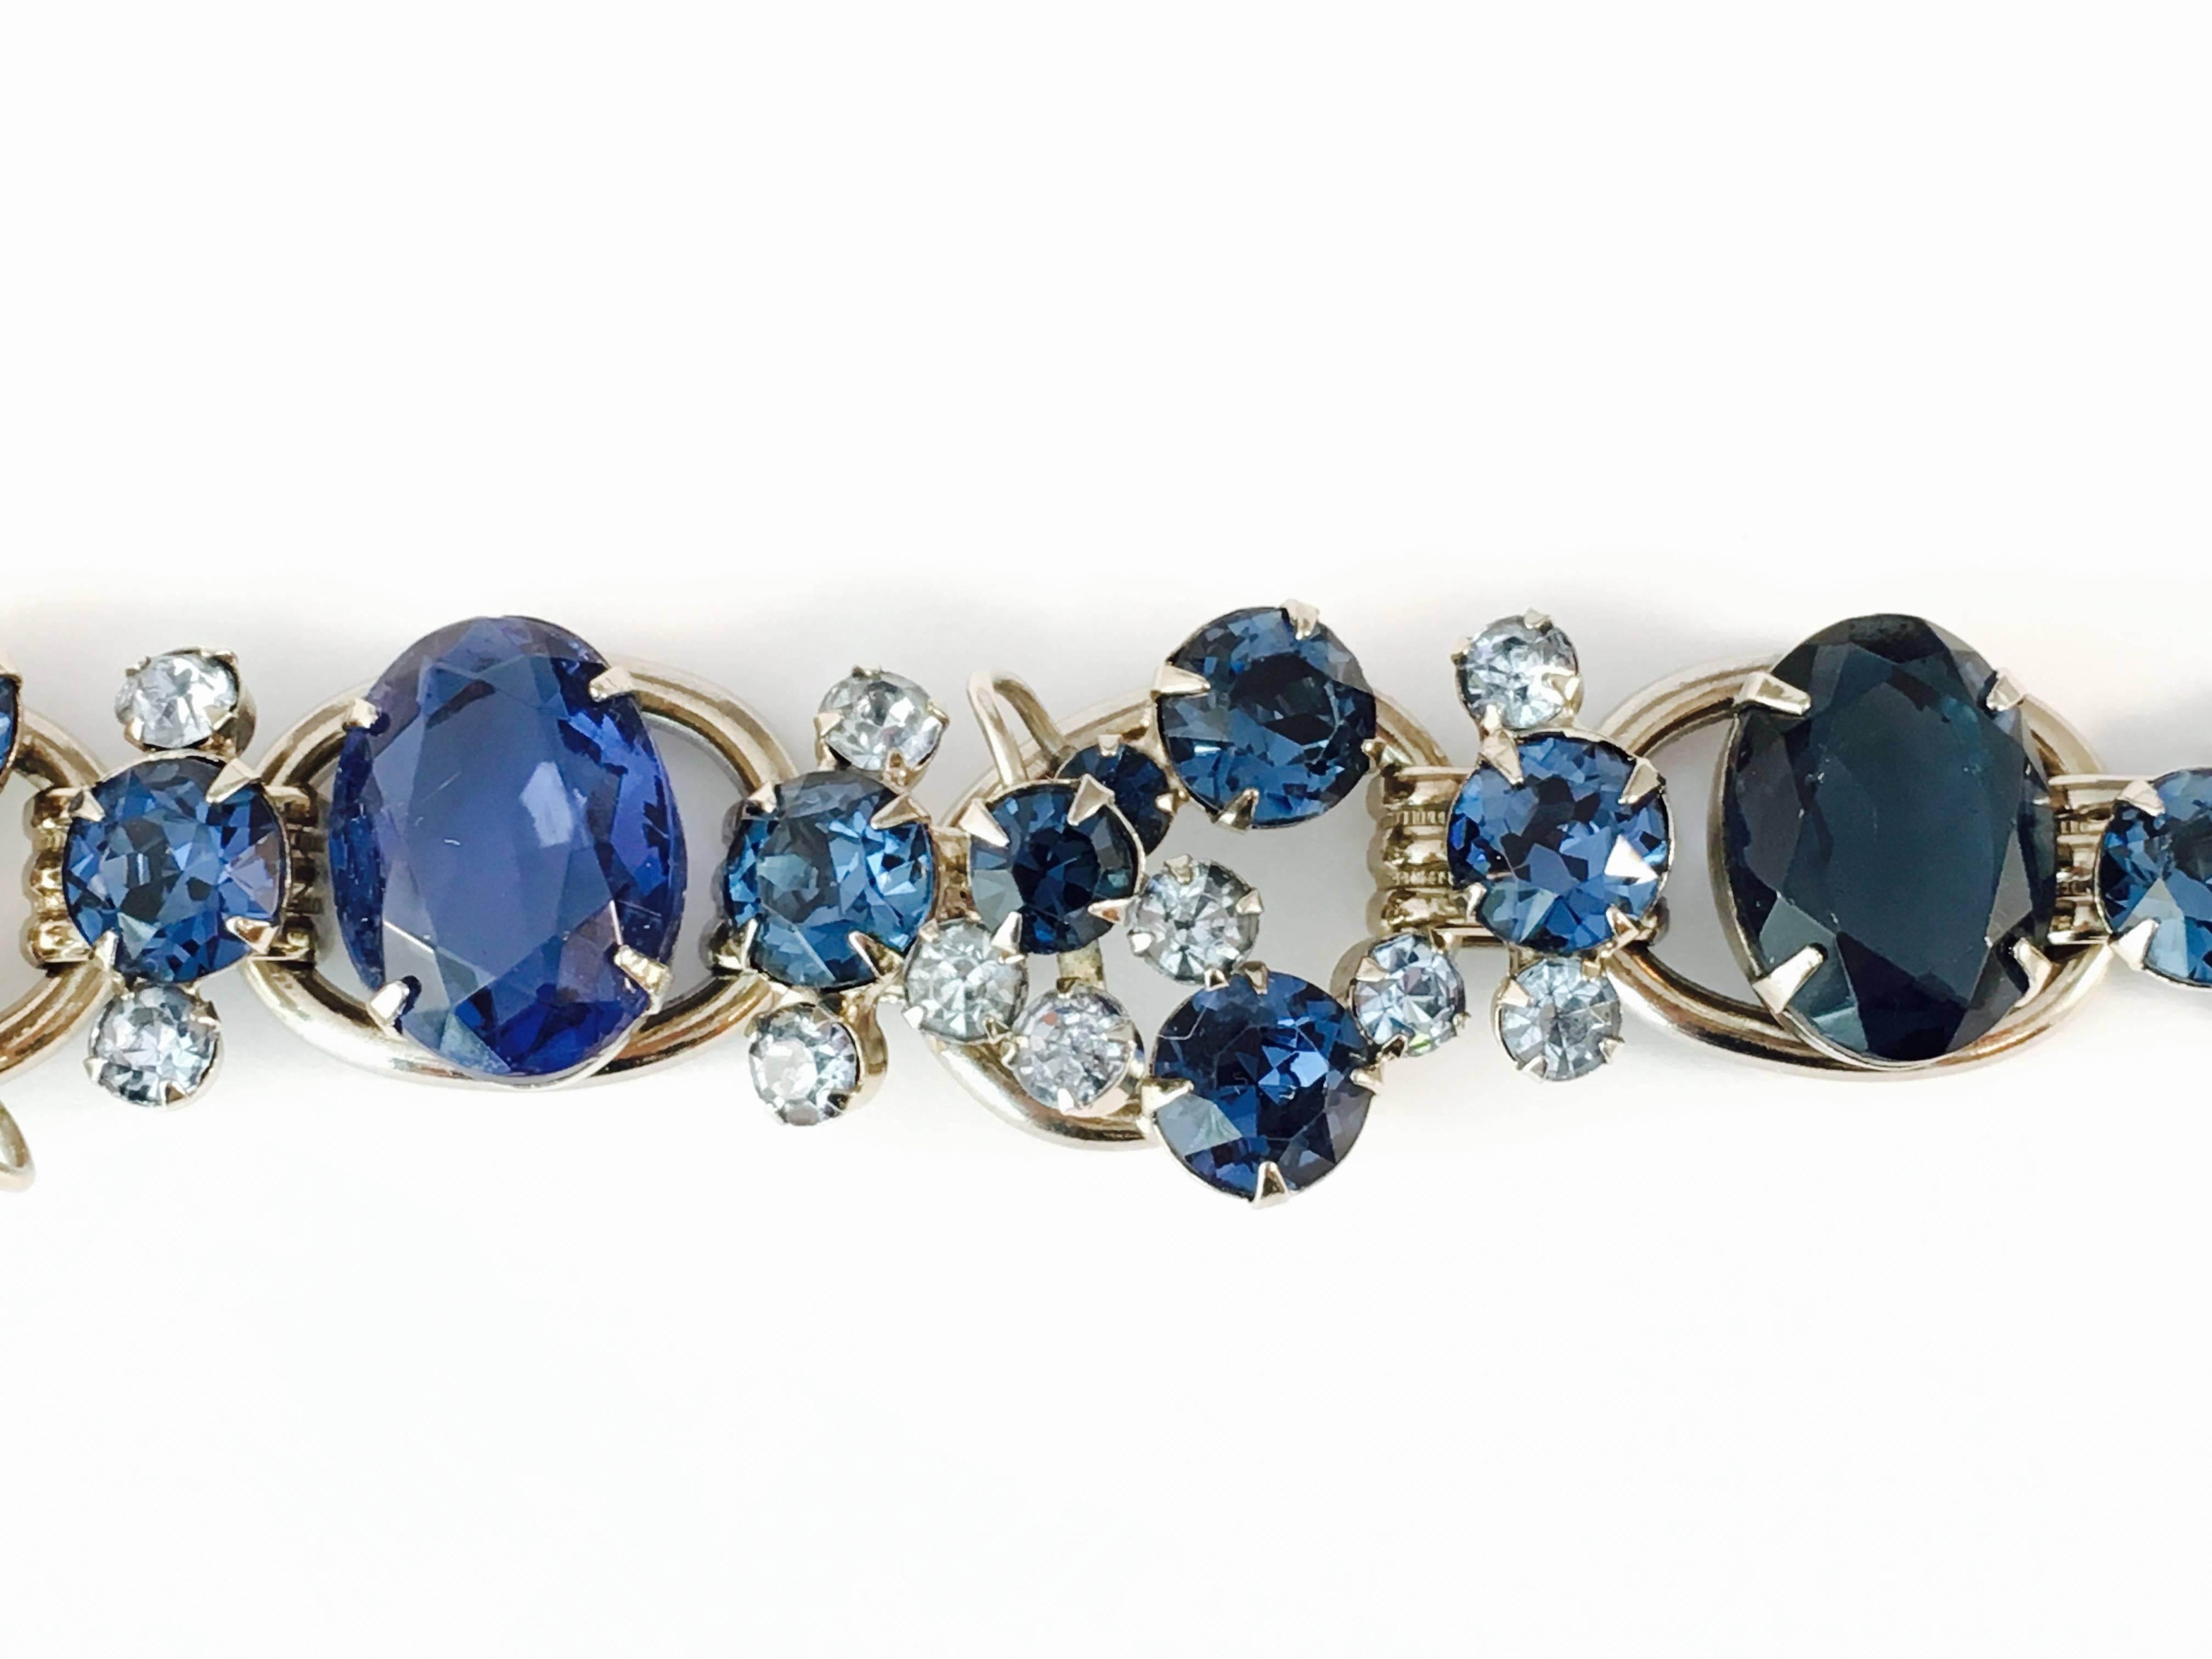 This beautiful silver-tone blue rhinestone Juliana bracelet is made up of brilliant, high quality, light and dark blue crystal glass stones which are prong set. It measures 7 1/4" long and 7/8" wide. It has a fold-over clasp and its